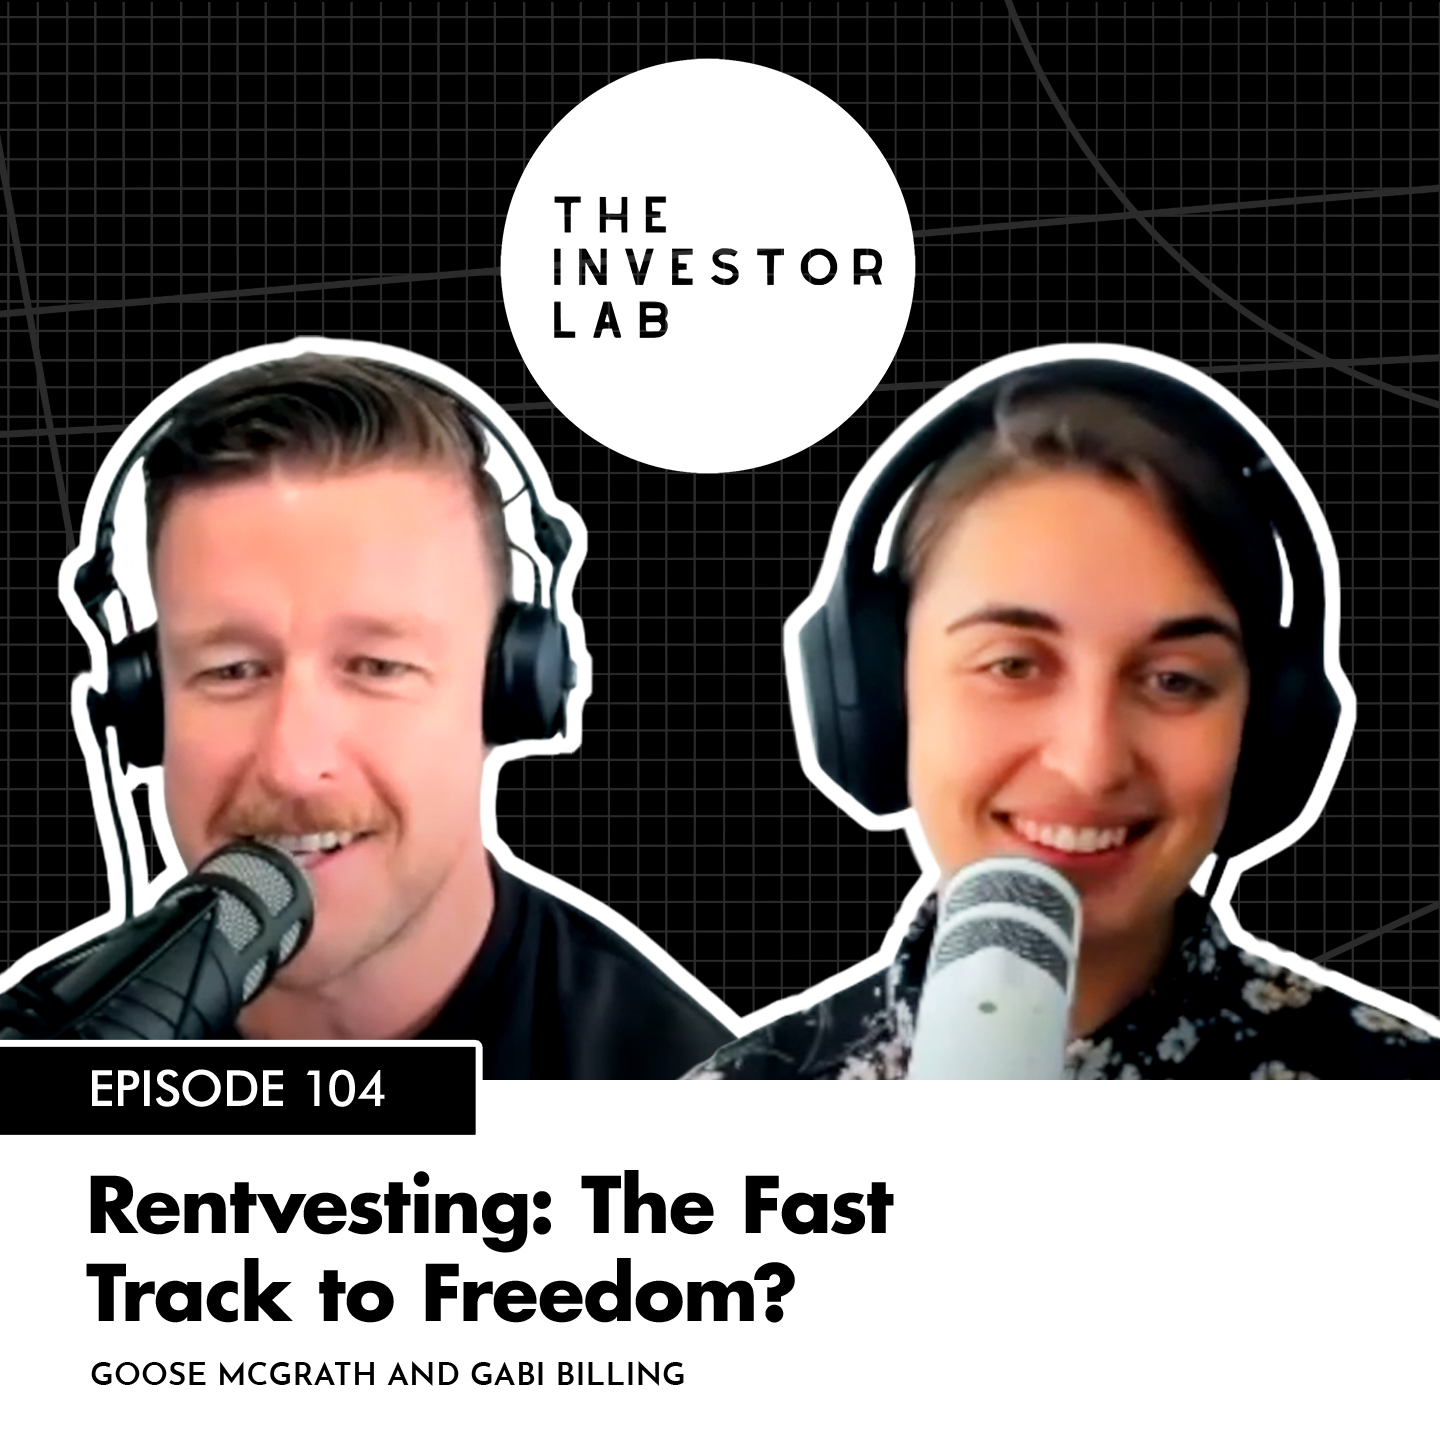 Rentvesting: The Fast Track to Freedom?